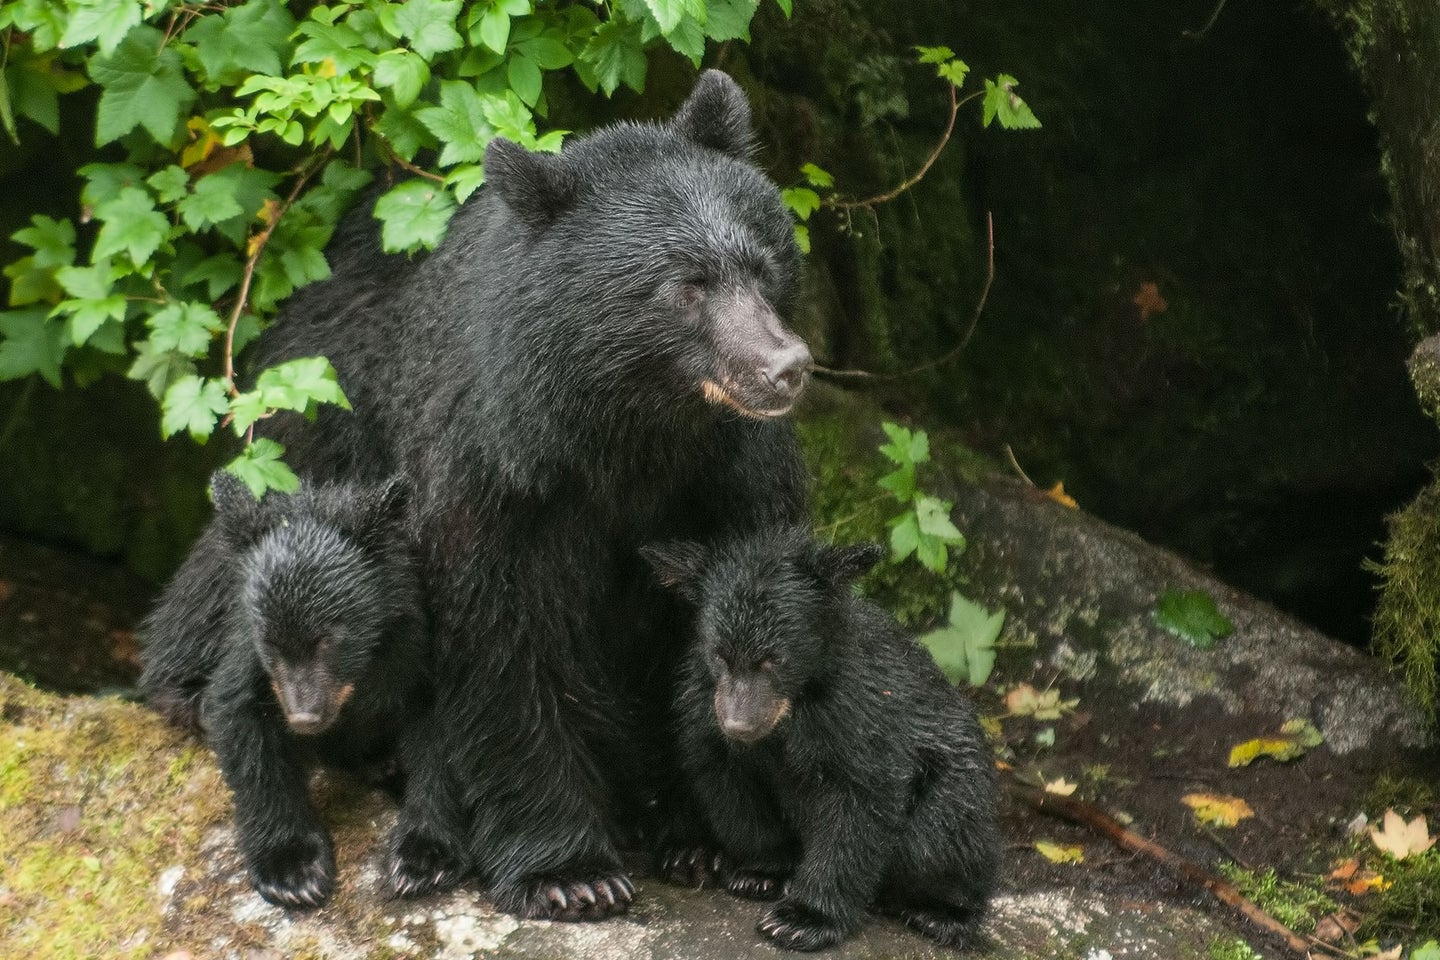 Wildlife managers estimate that Colorado has between 17,000-20,000 bears and that the population is stable and growing. 